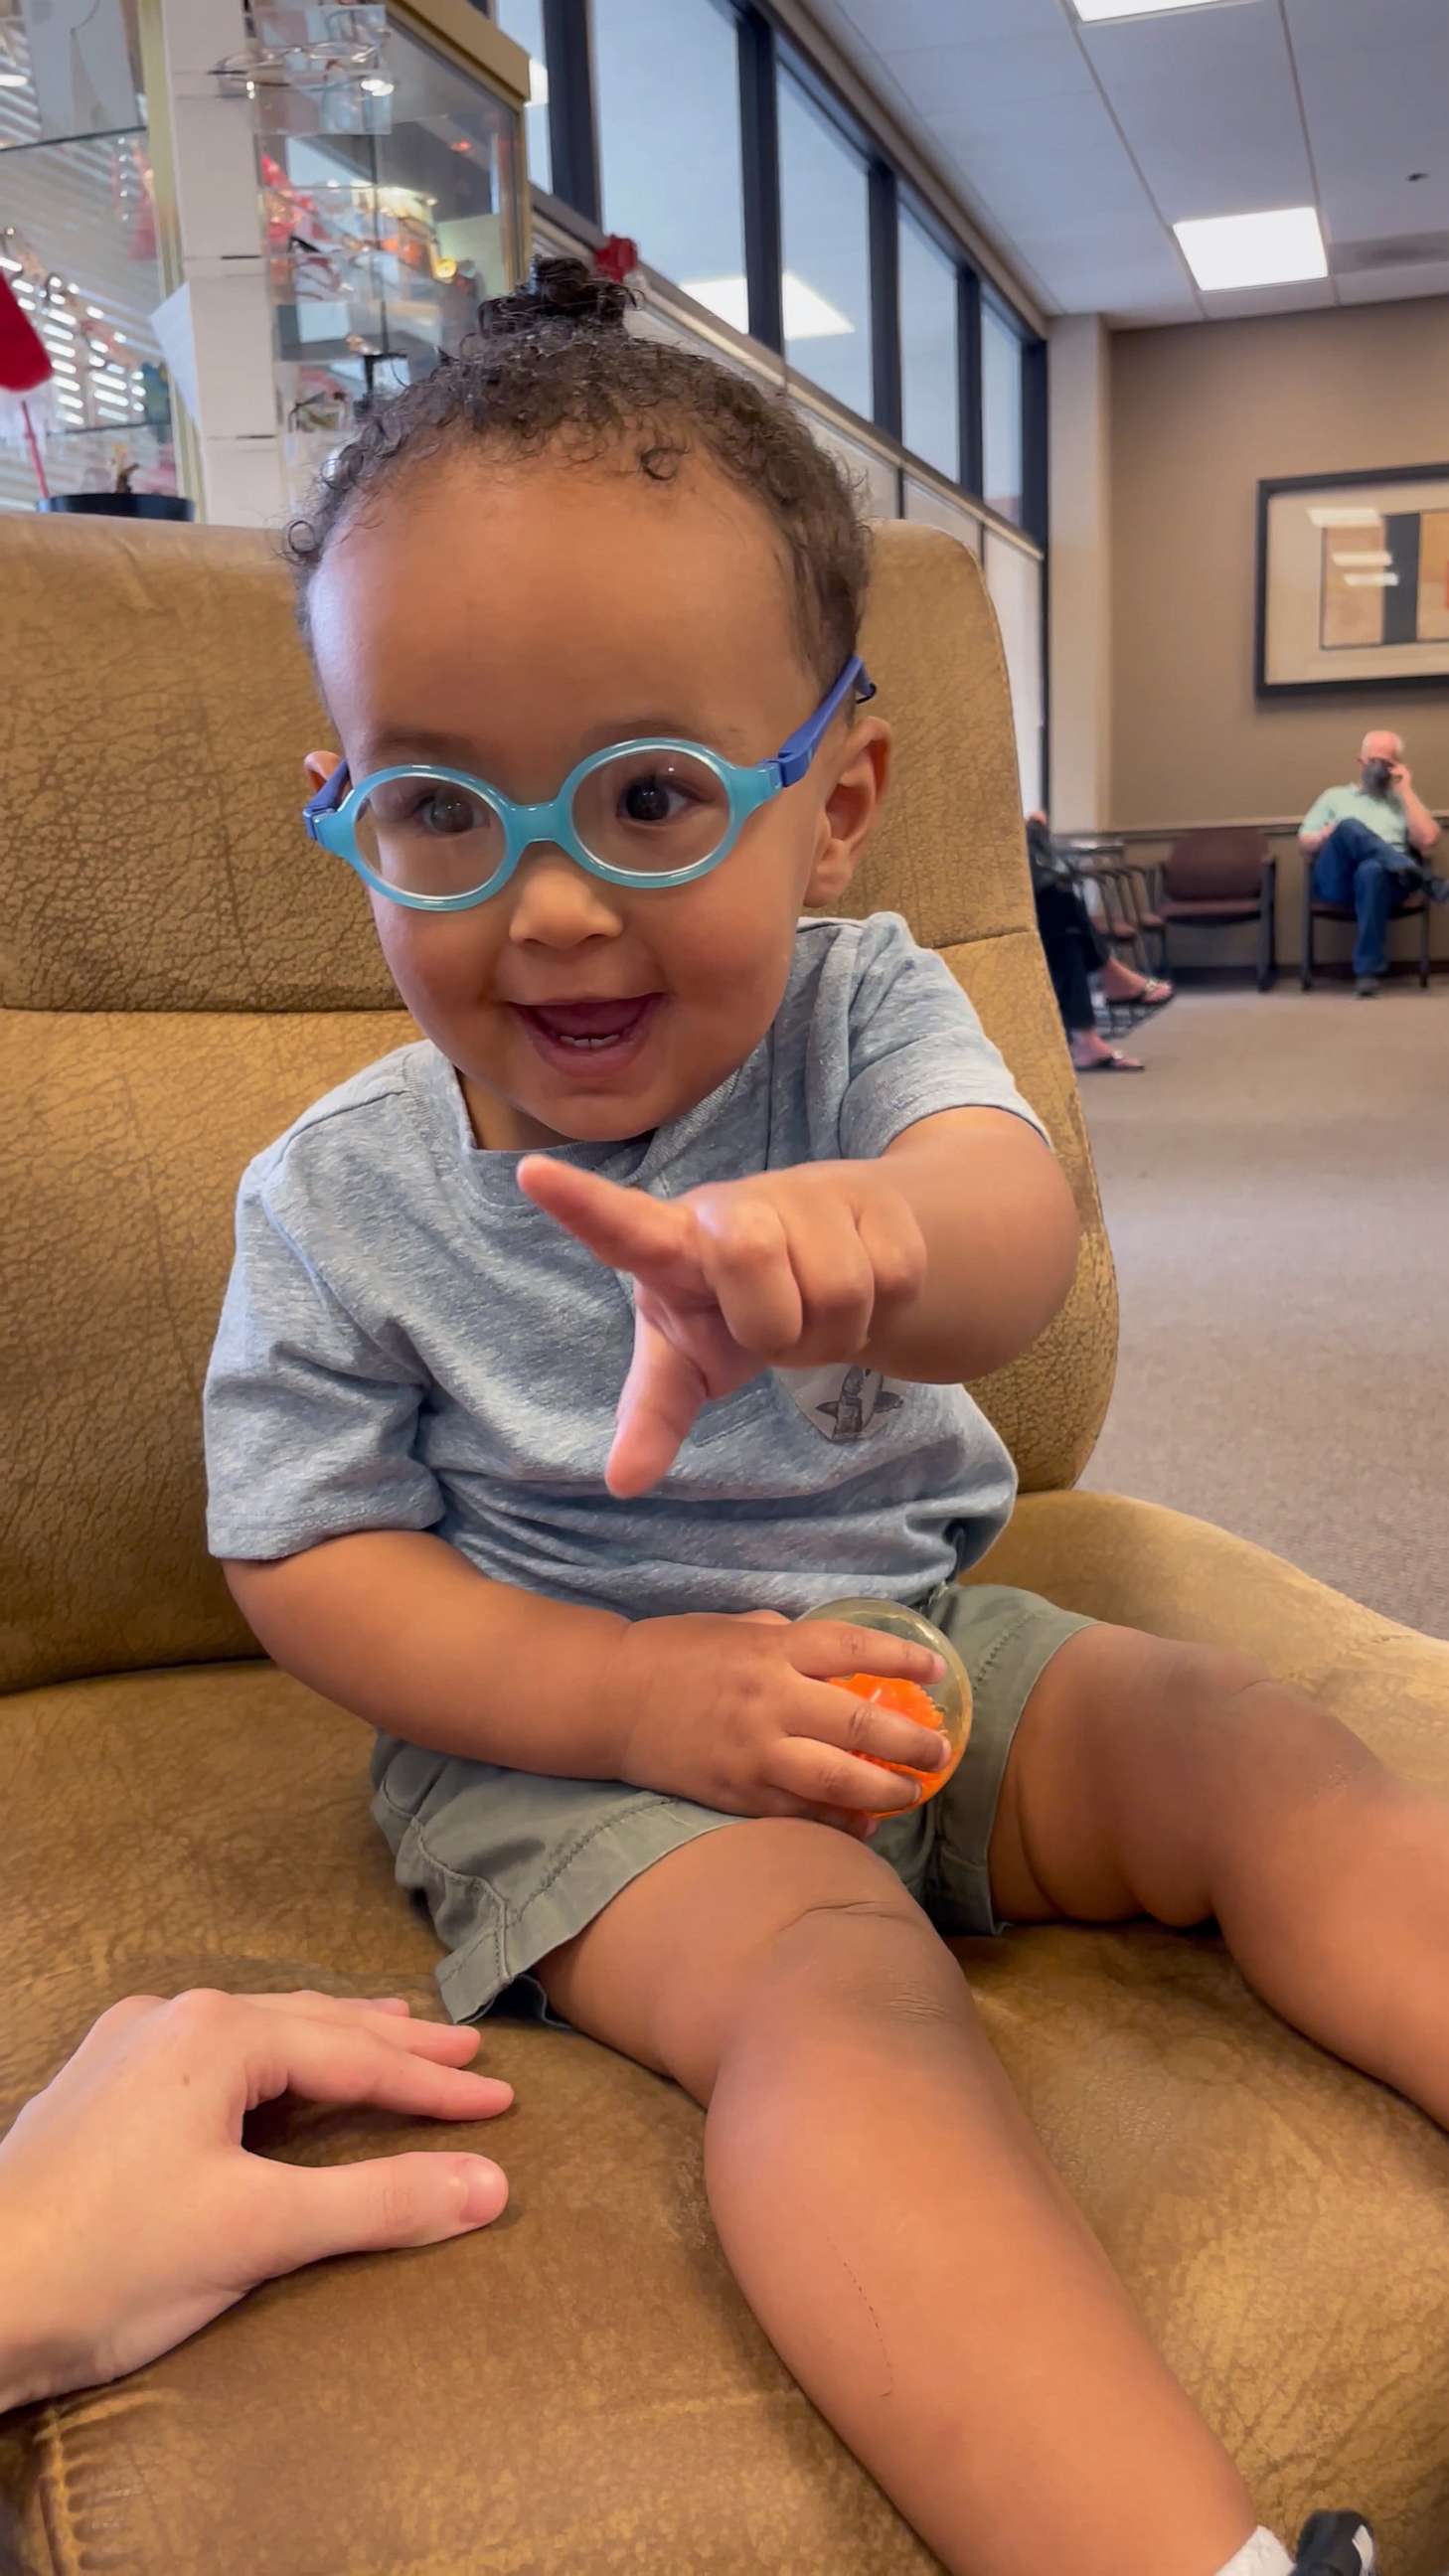 PHOTO: Keaton, a 16-month-old from Sugar Land, Texas, had an adorable reaction when wearing prescription glasses for the first time.